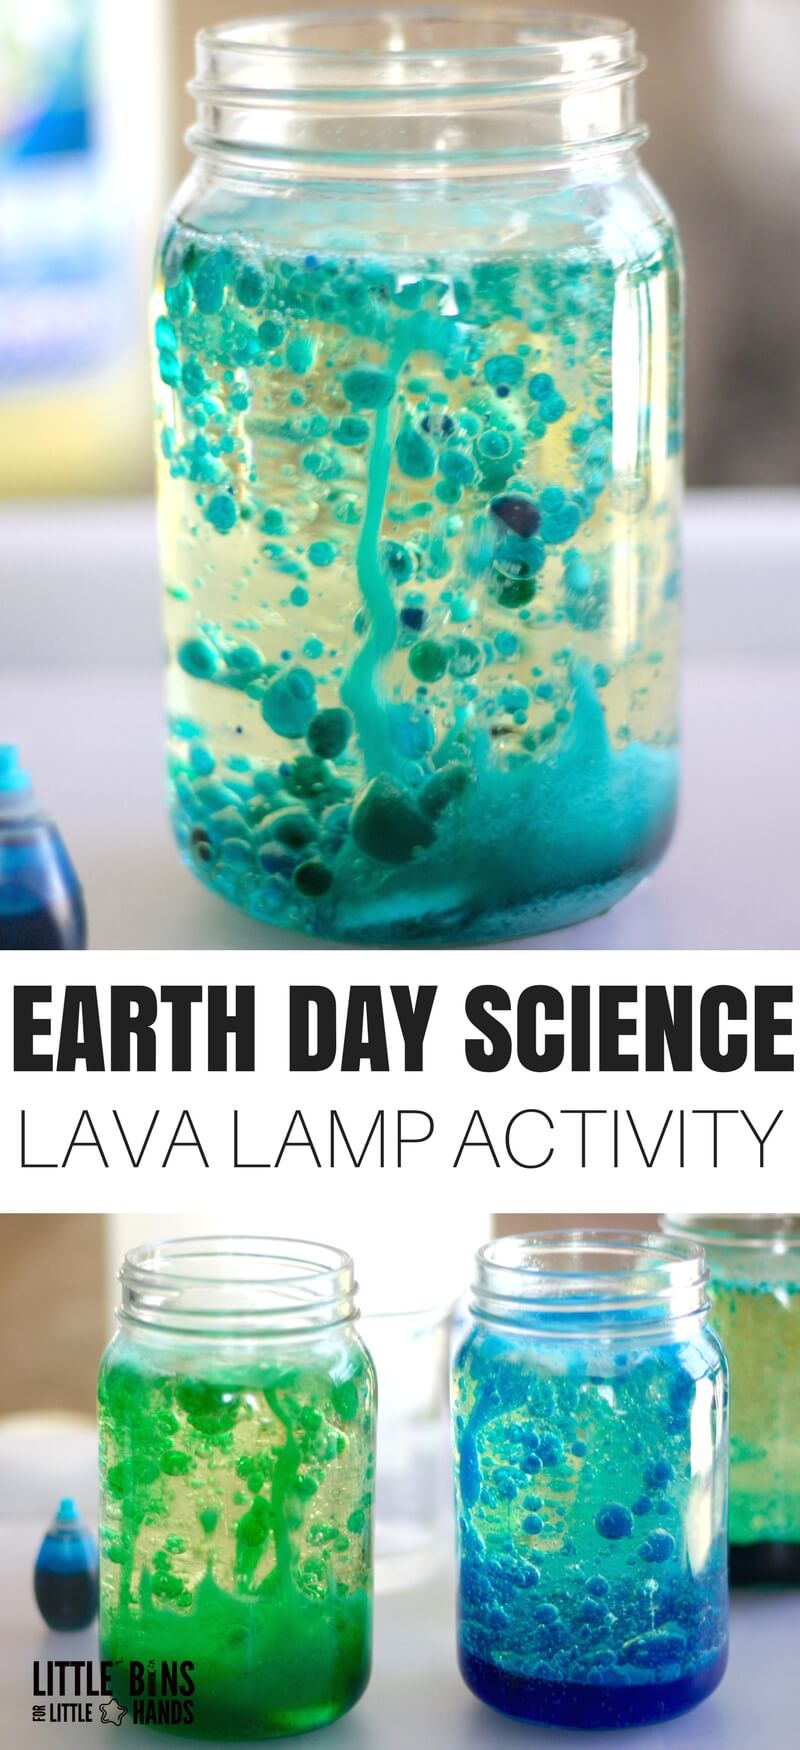 This simple to set up but amazingly fun Earth Day science activity is perfect for kids of all ages to explore! Try kitchen science with a homemade lava lamp that explores liquid density and a cool chemical reaction. Simple science for the win!